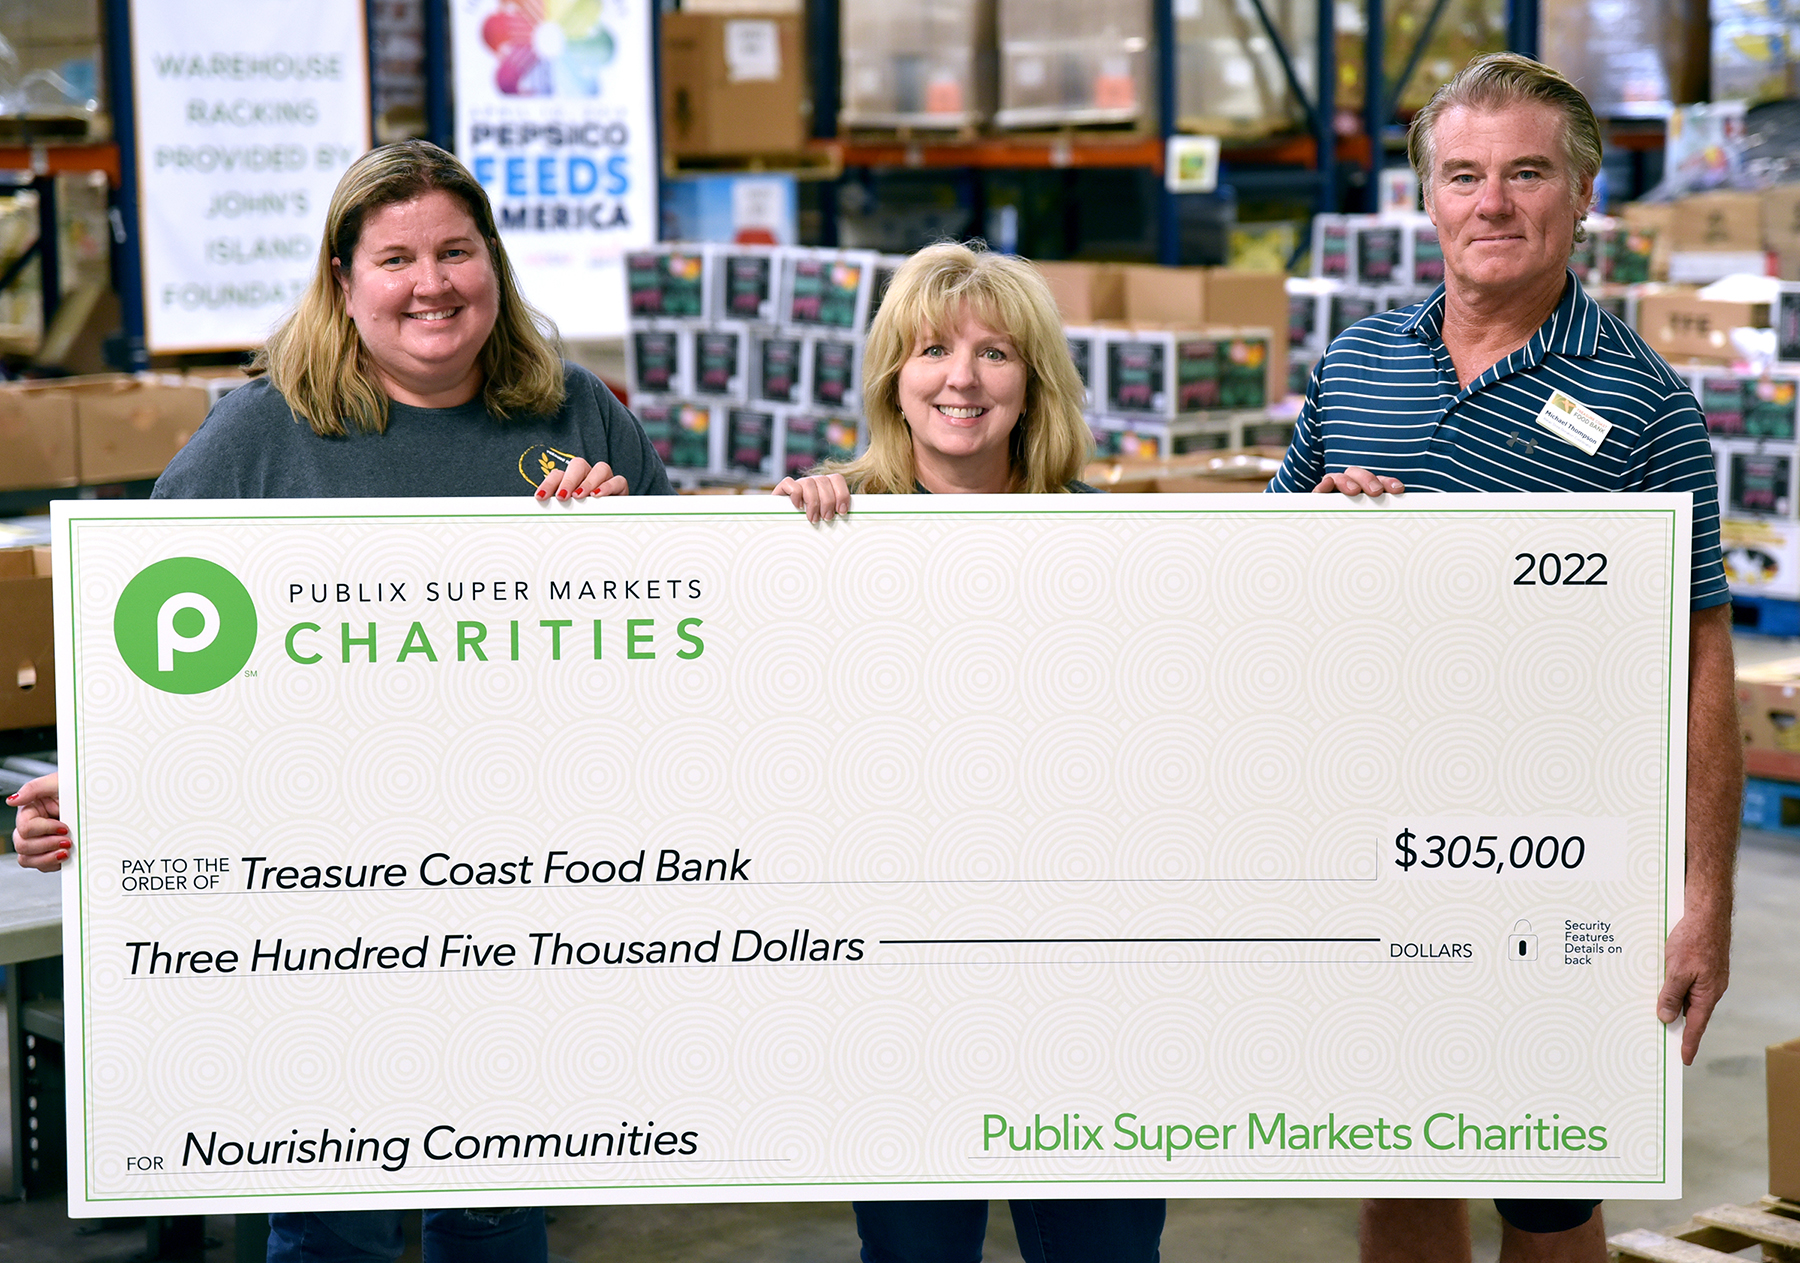 Treasure Coast Food Bank receives $175,000 donation from Publix Super Markets Charities for the purchase of a mobile food pantry